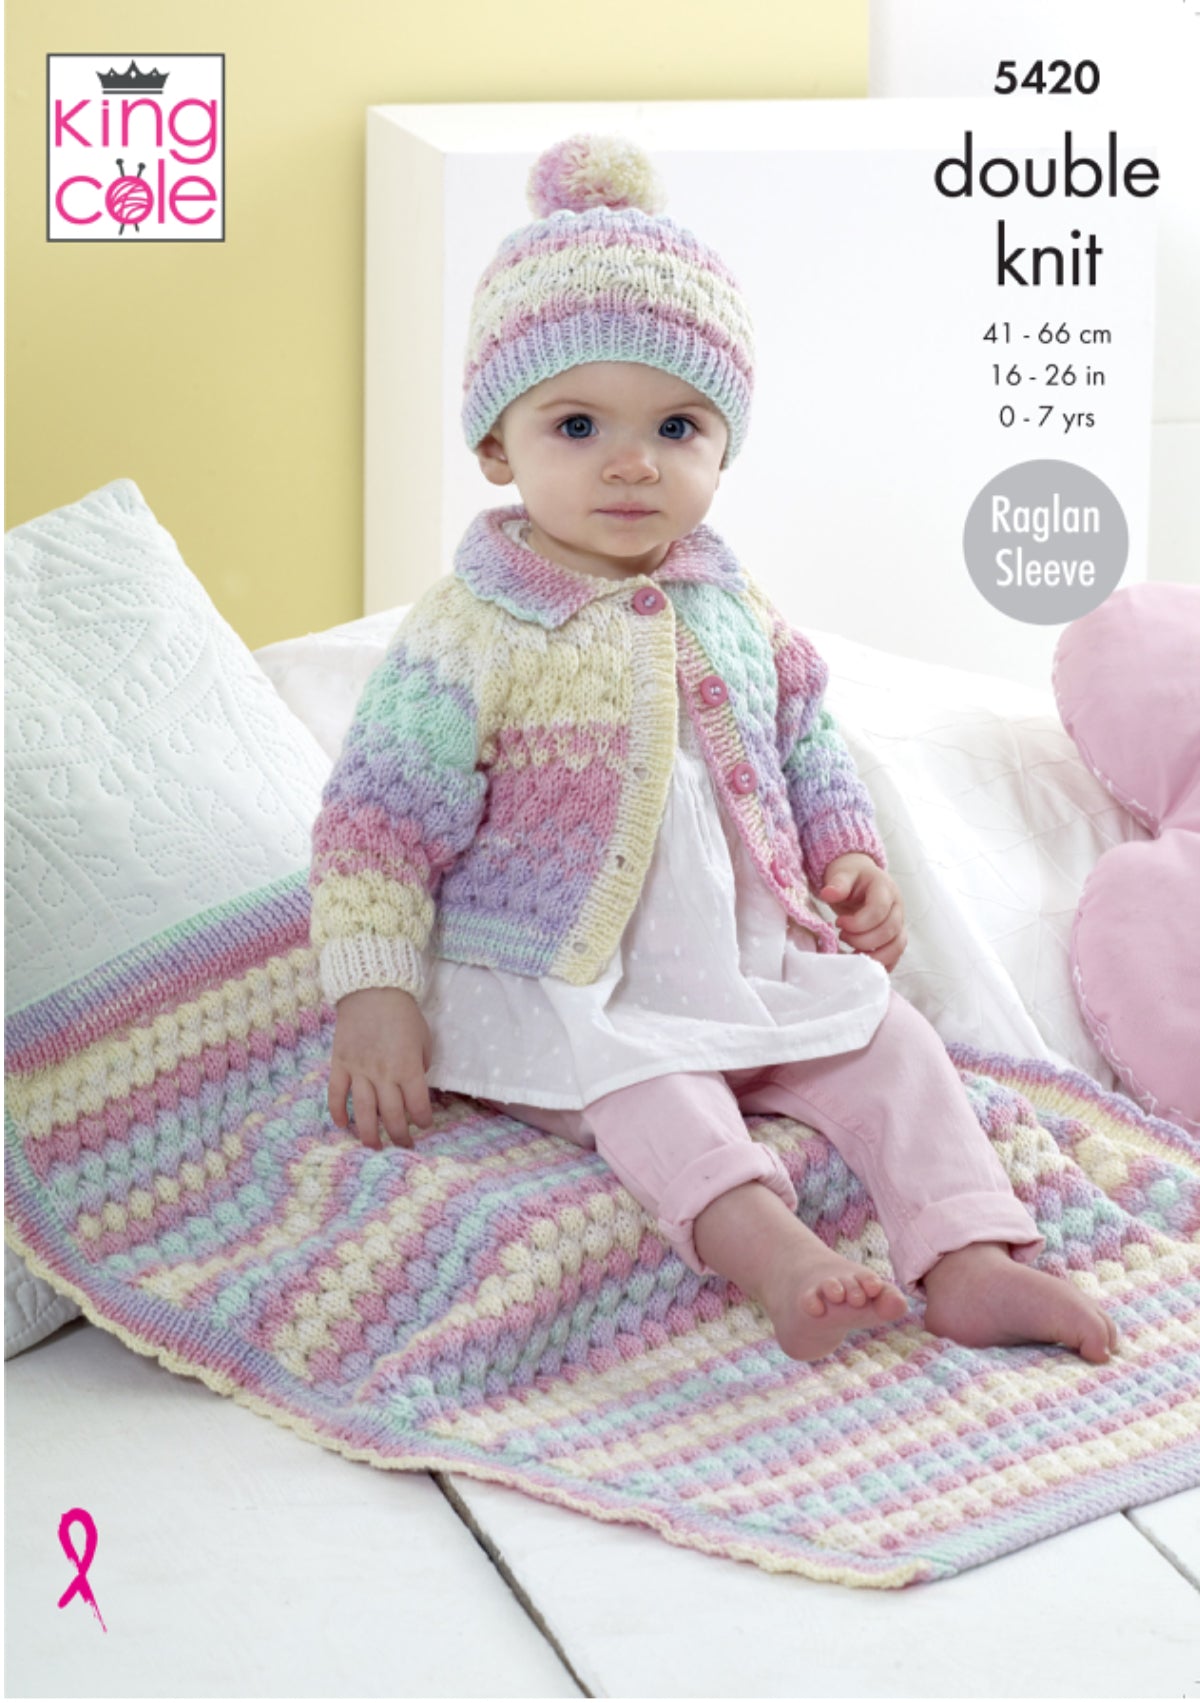 King Cole Pattern 5420 Cardigan, Hat and Blanket in Beaches DK (leaflet) Cardigan